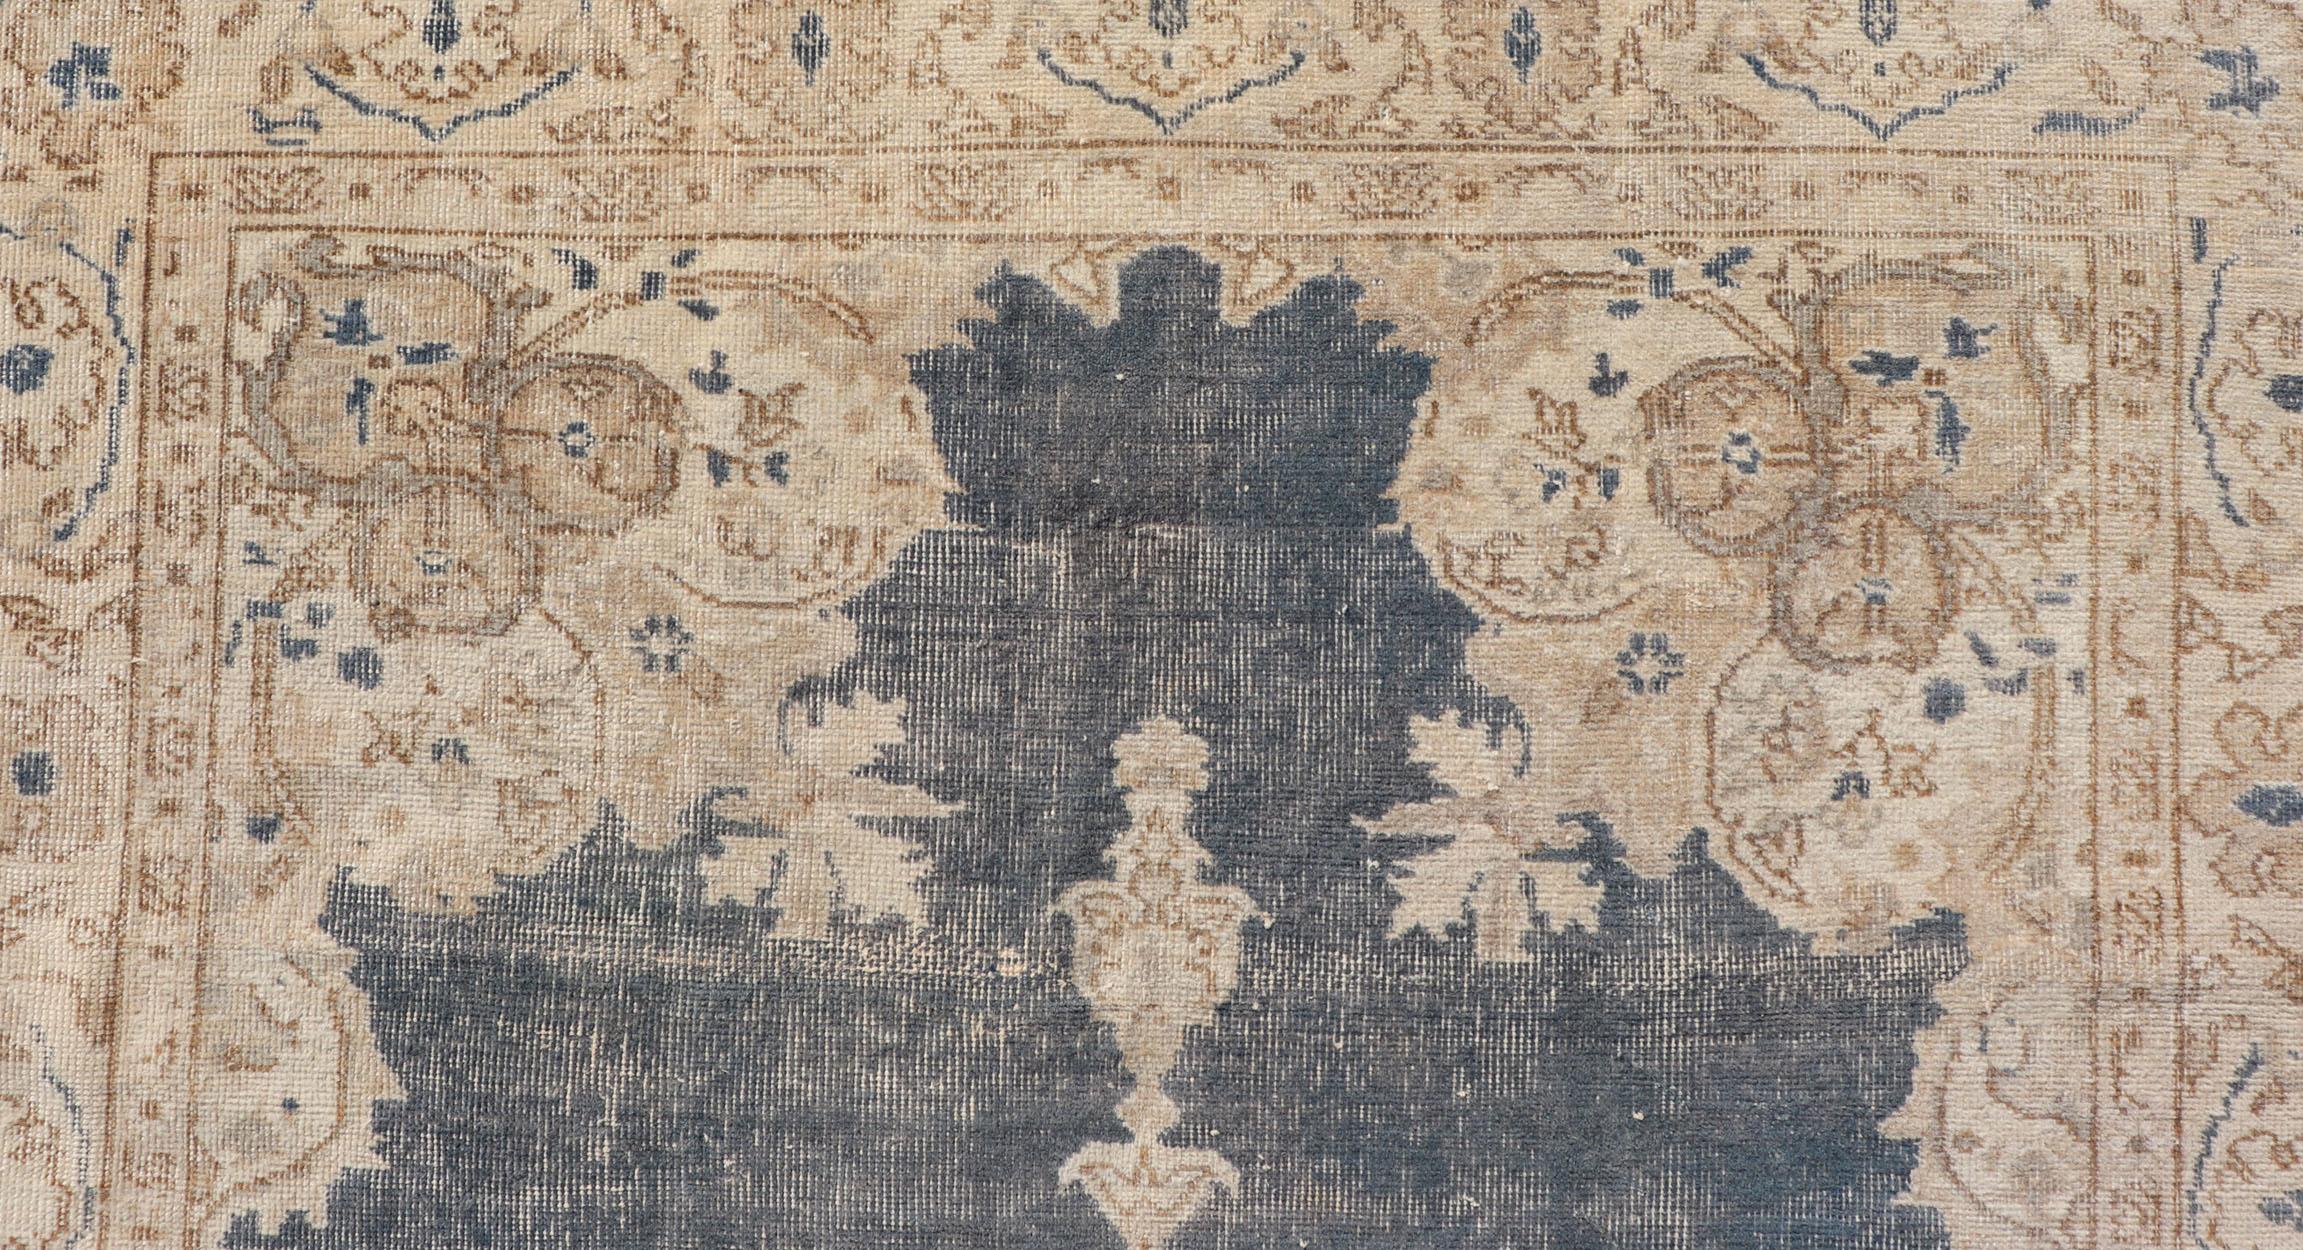 Distressed Turkish Carpet with Floral Design in Blue, Tan, Taupe, and Cream For Sale 3